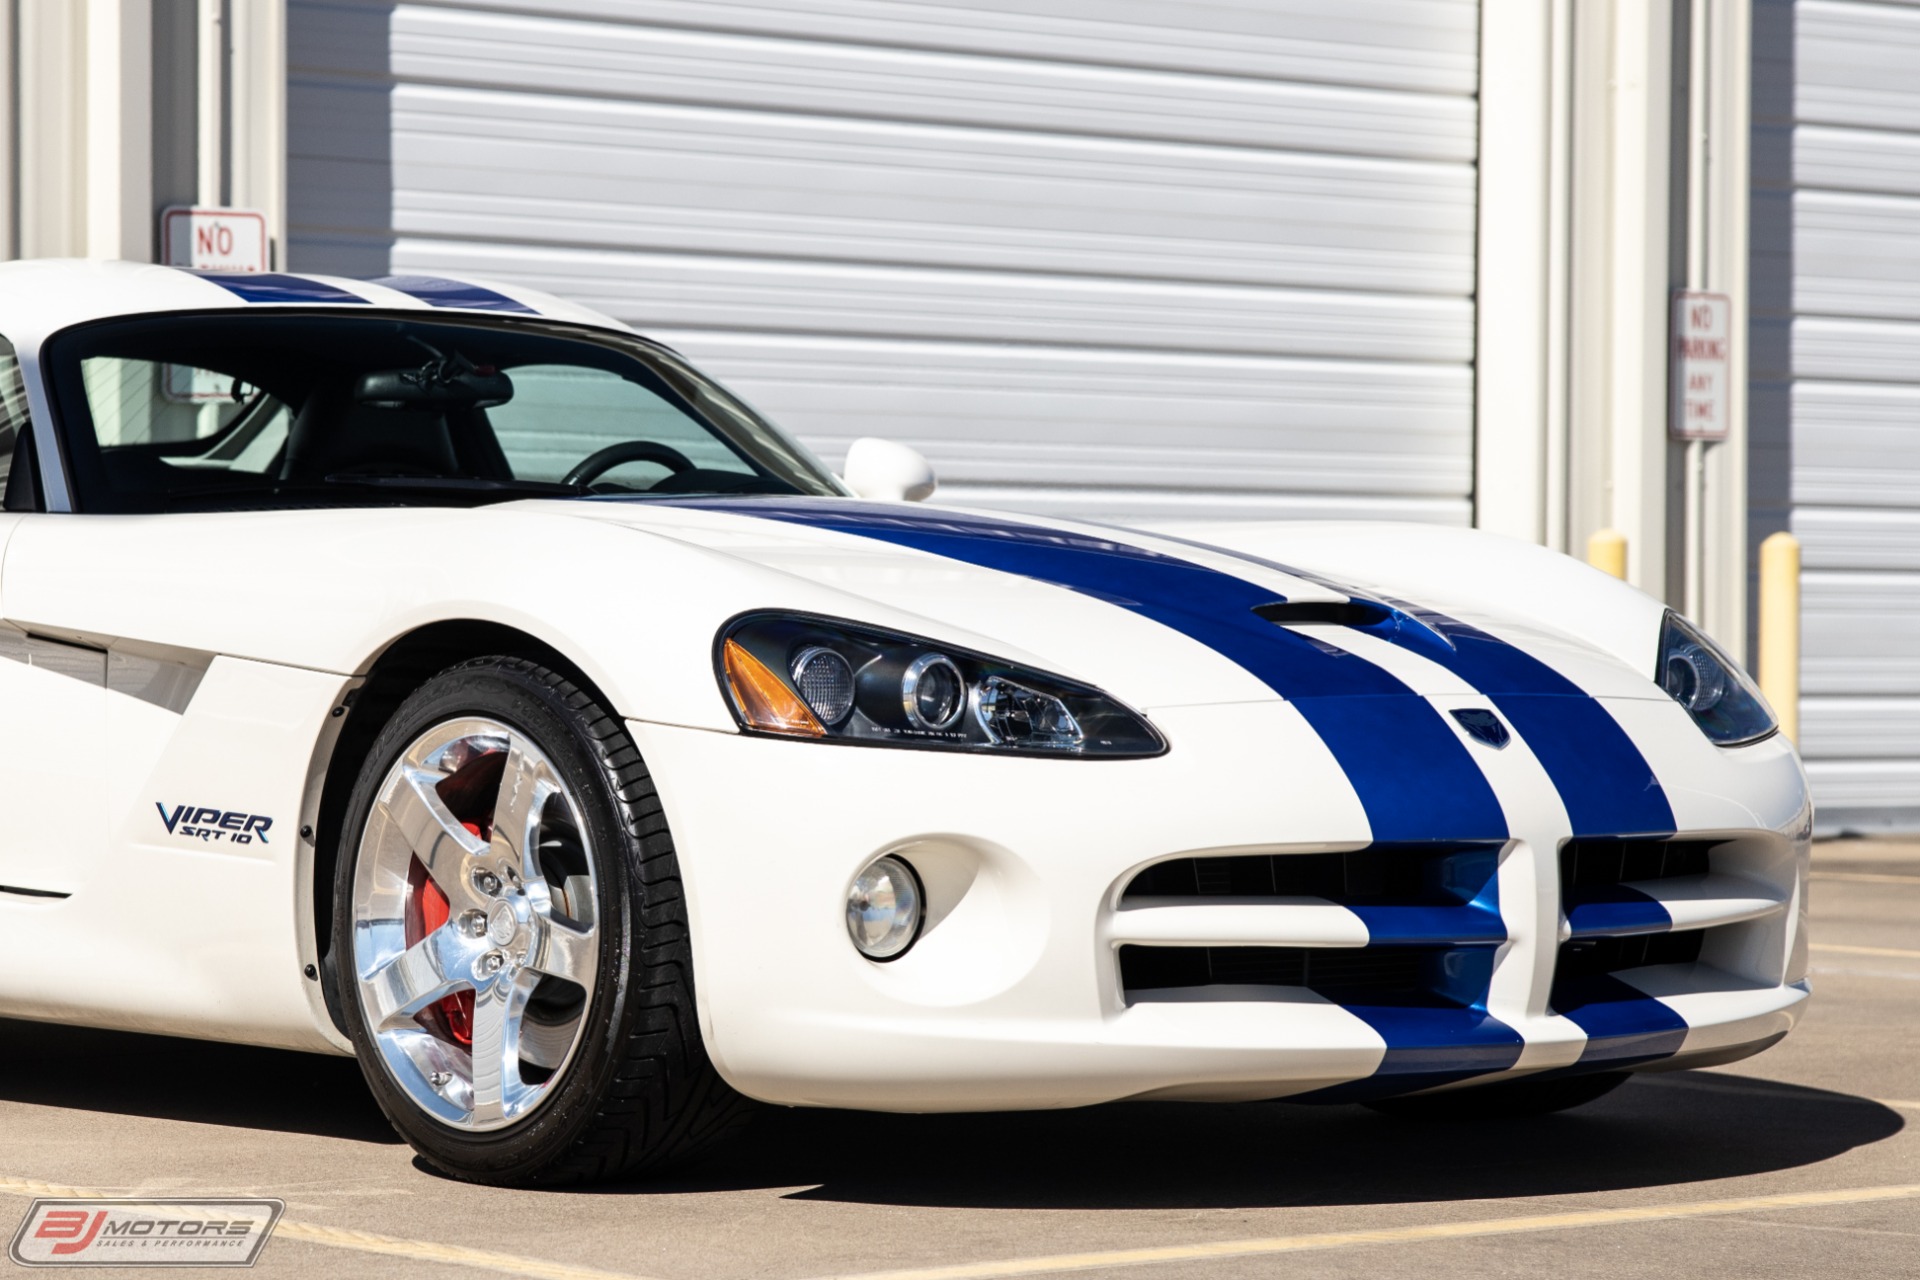 Used-2006-Dodge-Viper-VOI9-Limited-Edition